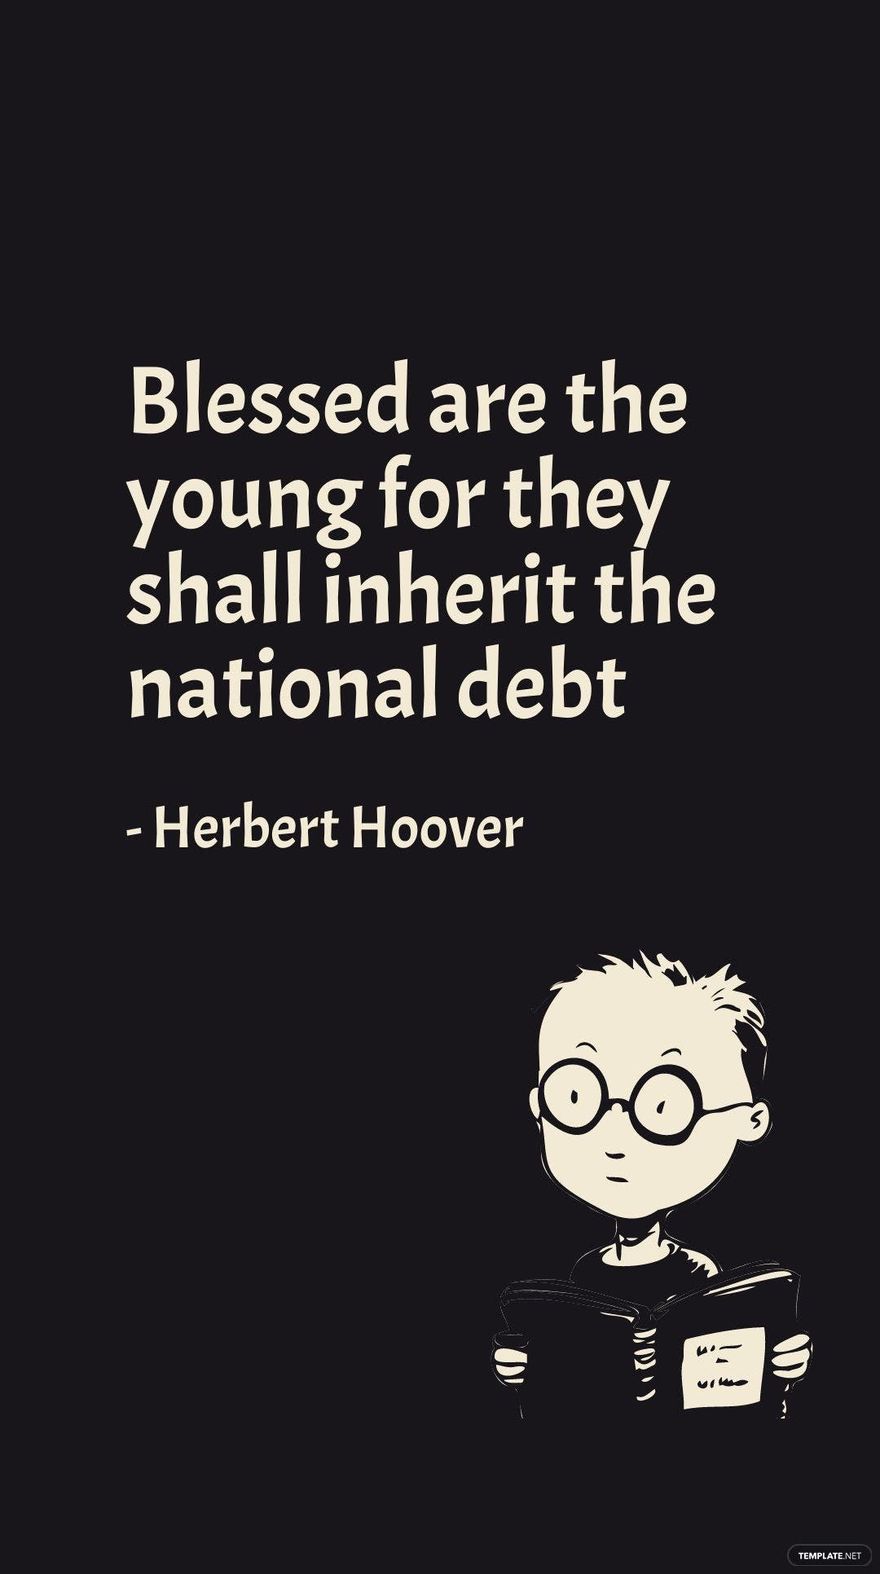 Herbert Hoover - Blessed are the young for they shall inherit the national debt in JPG